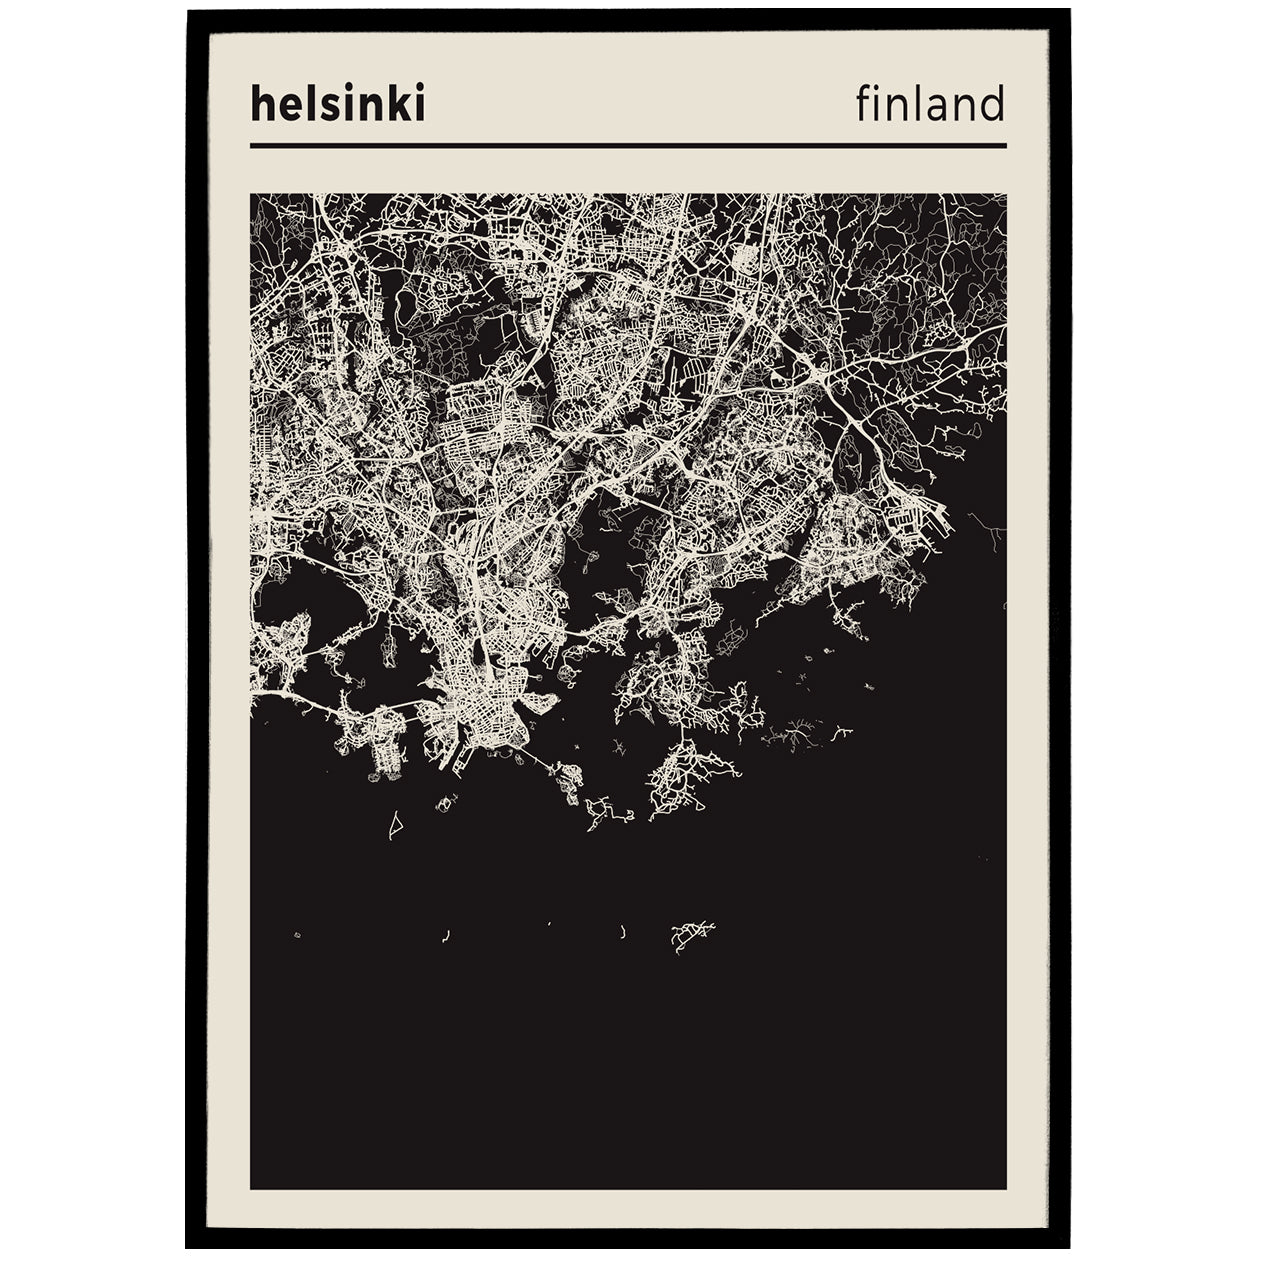 Helsinki, Finland - Black and White Map Poster